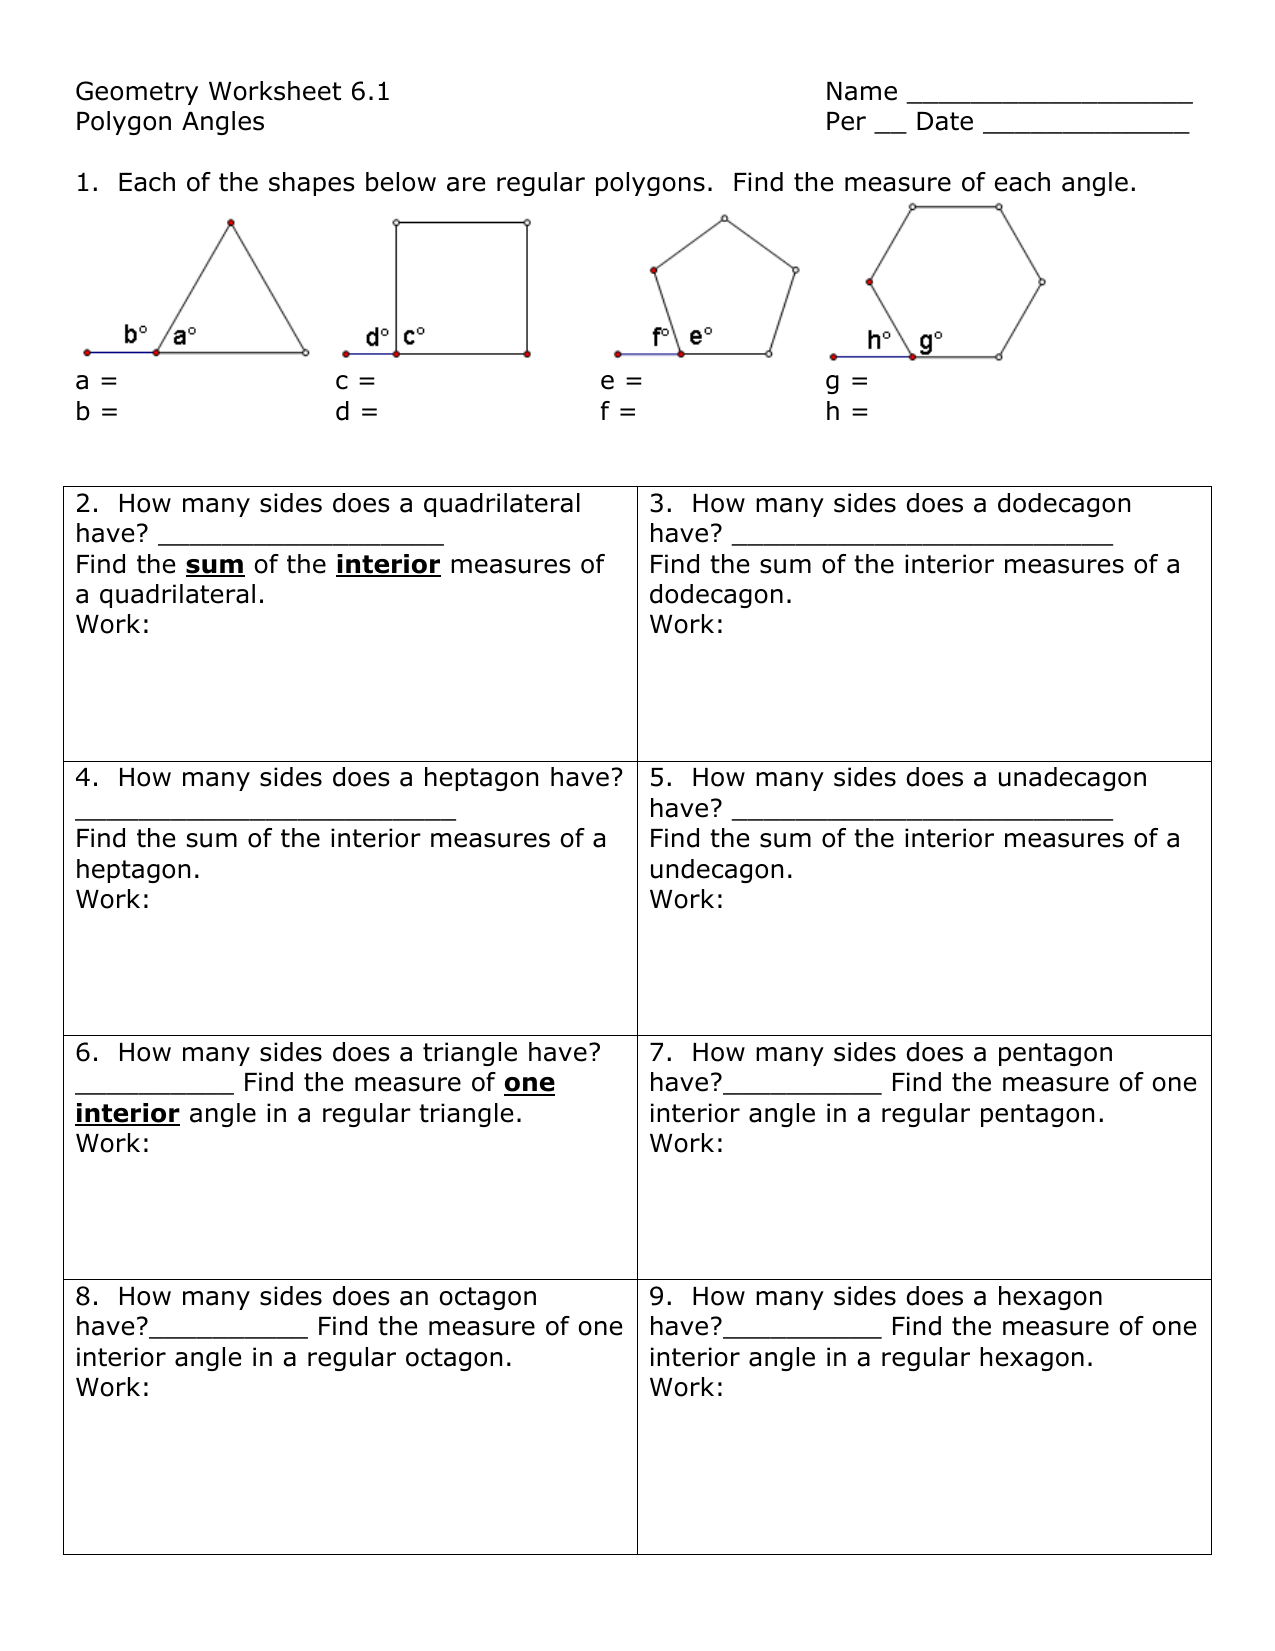 22.22 worksheet For Polygon And Angles Worksheet